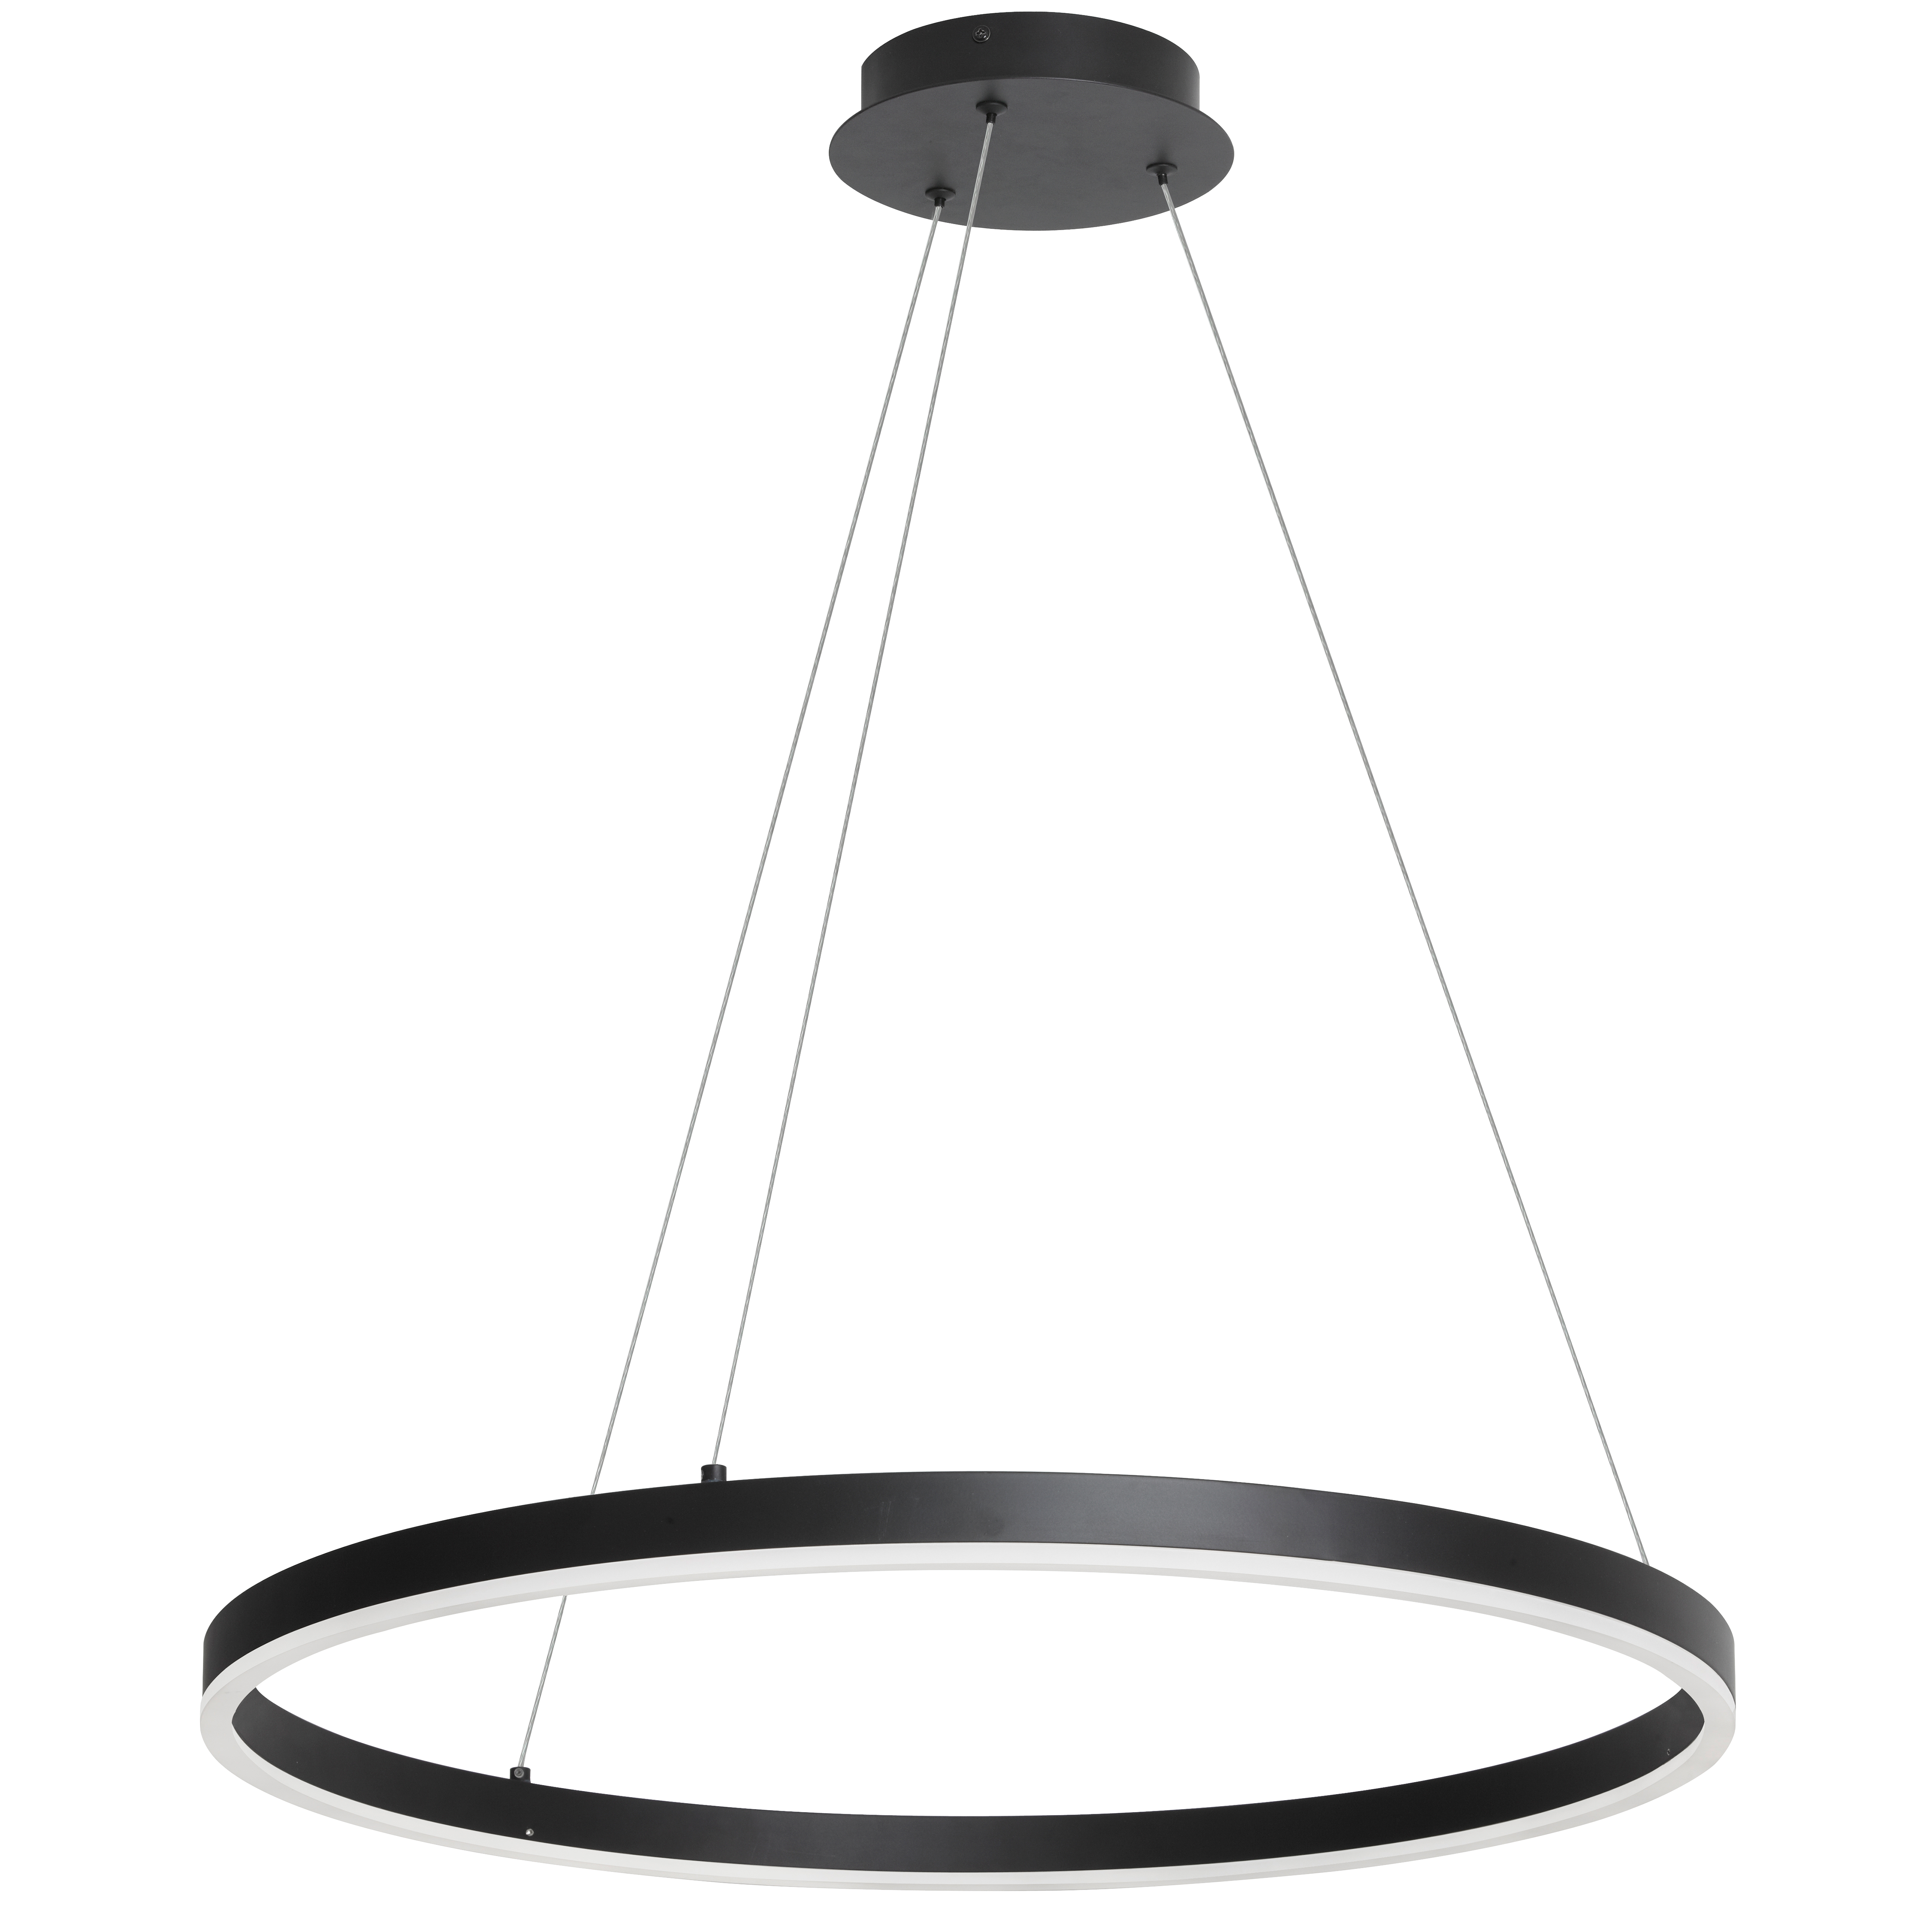 Featuring subtle, face-friendly lighting in a design with a simple and circular appeal, the Circulo family of lighting adds curves to minimalist and modern furnishings.  The airy design comes in one or two tier configurations, with a metal base in your choice of finish, all with a white acrylic diffuser along the inside of the circular shade. Cable drops secure the design in place.  Eye-catching without becoming overbearing, the Circulo family of lighting comes in various sizes suitable for any room of your home, including hallways.